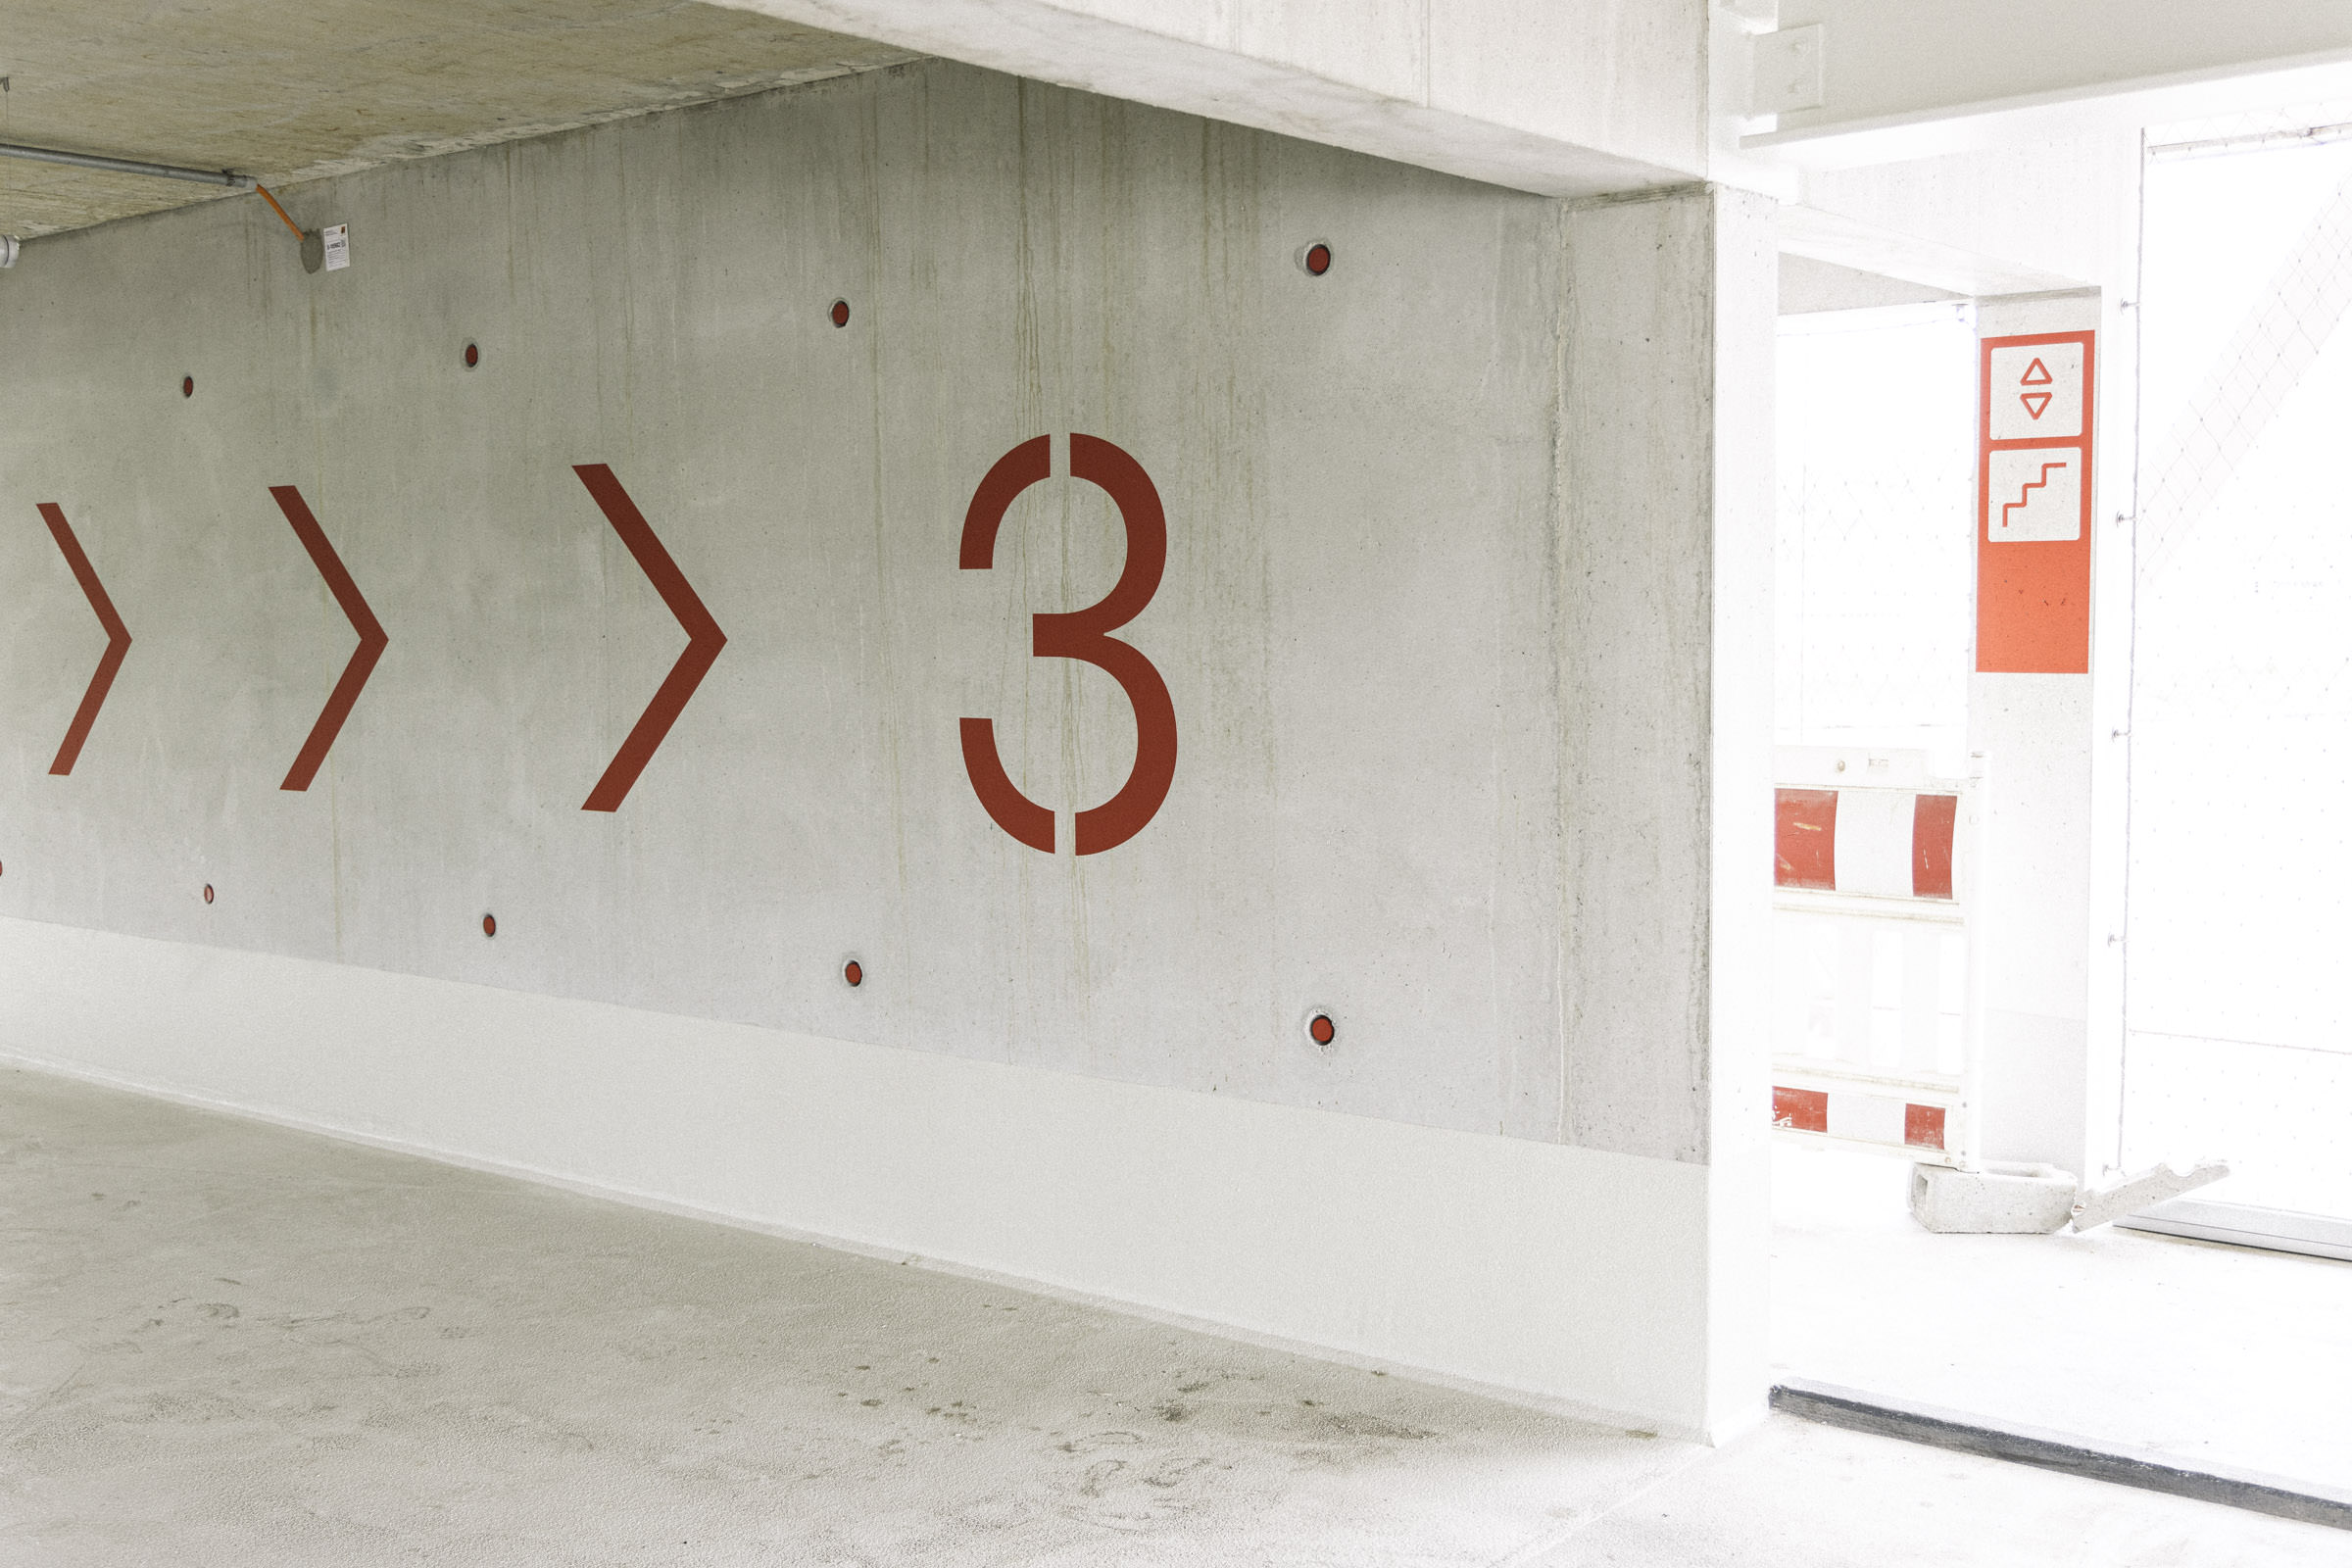 Big stencil arrows and letters are essential elements of the wayfinding